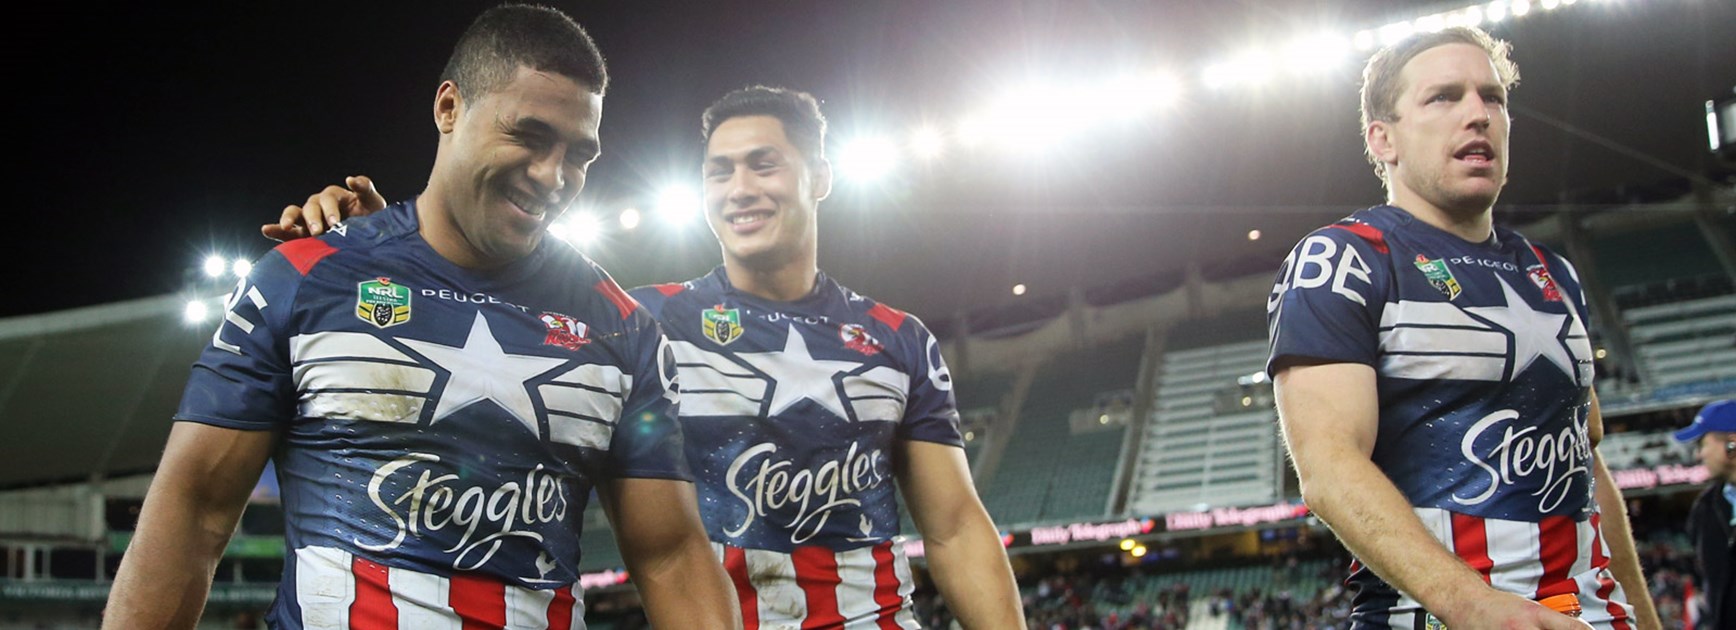 Michael Jennings and Roger Tuivasa-Sheck following the Roosters' remarkable Round 21 win over the Bulldogs.